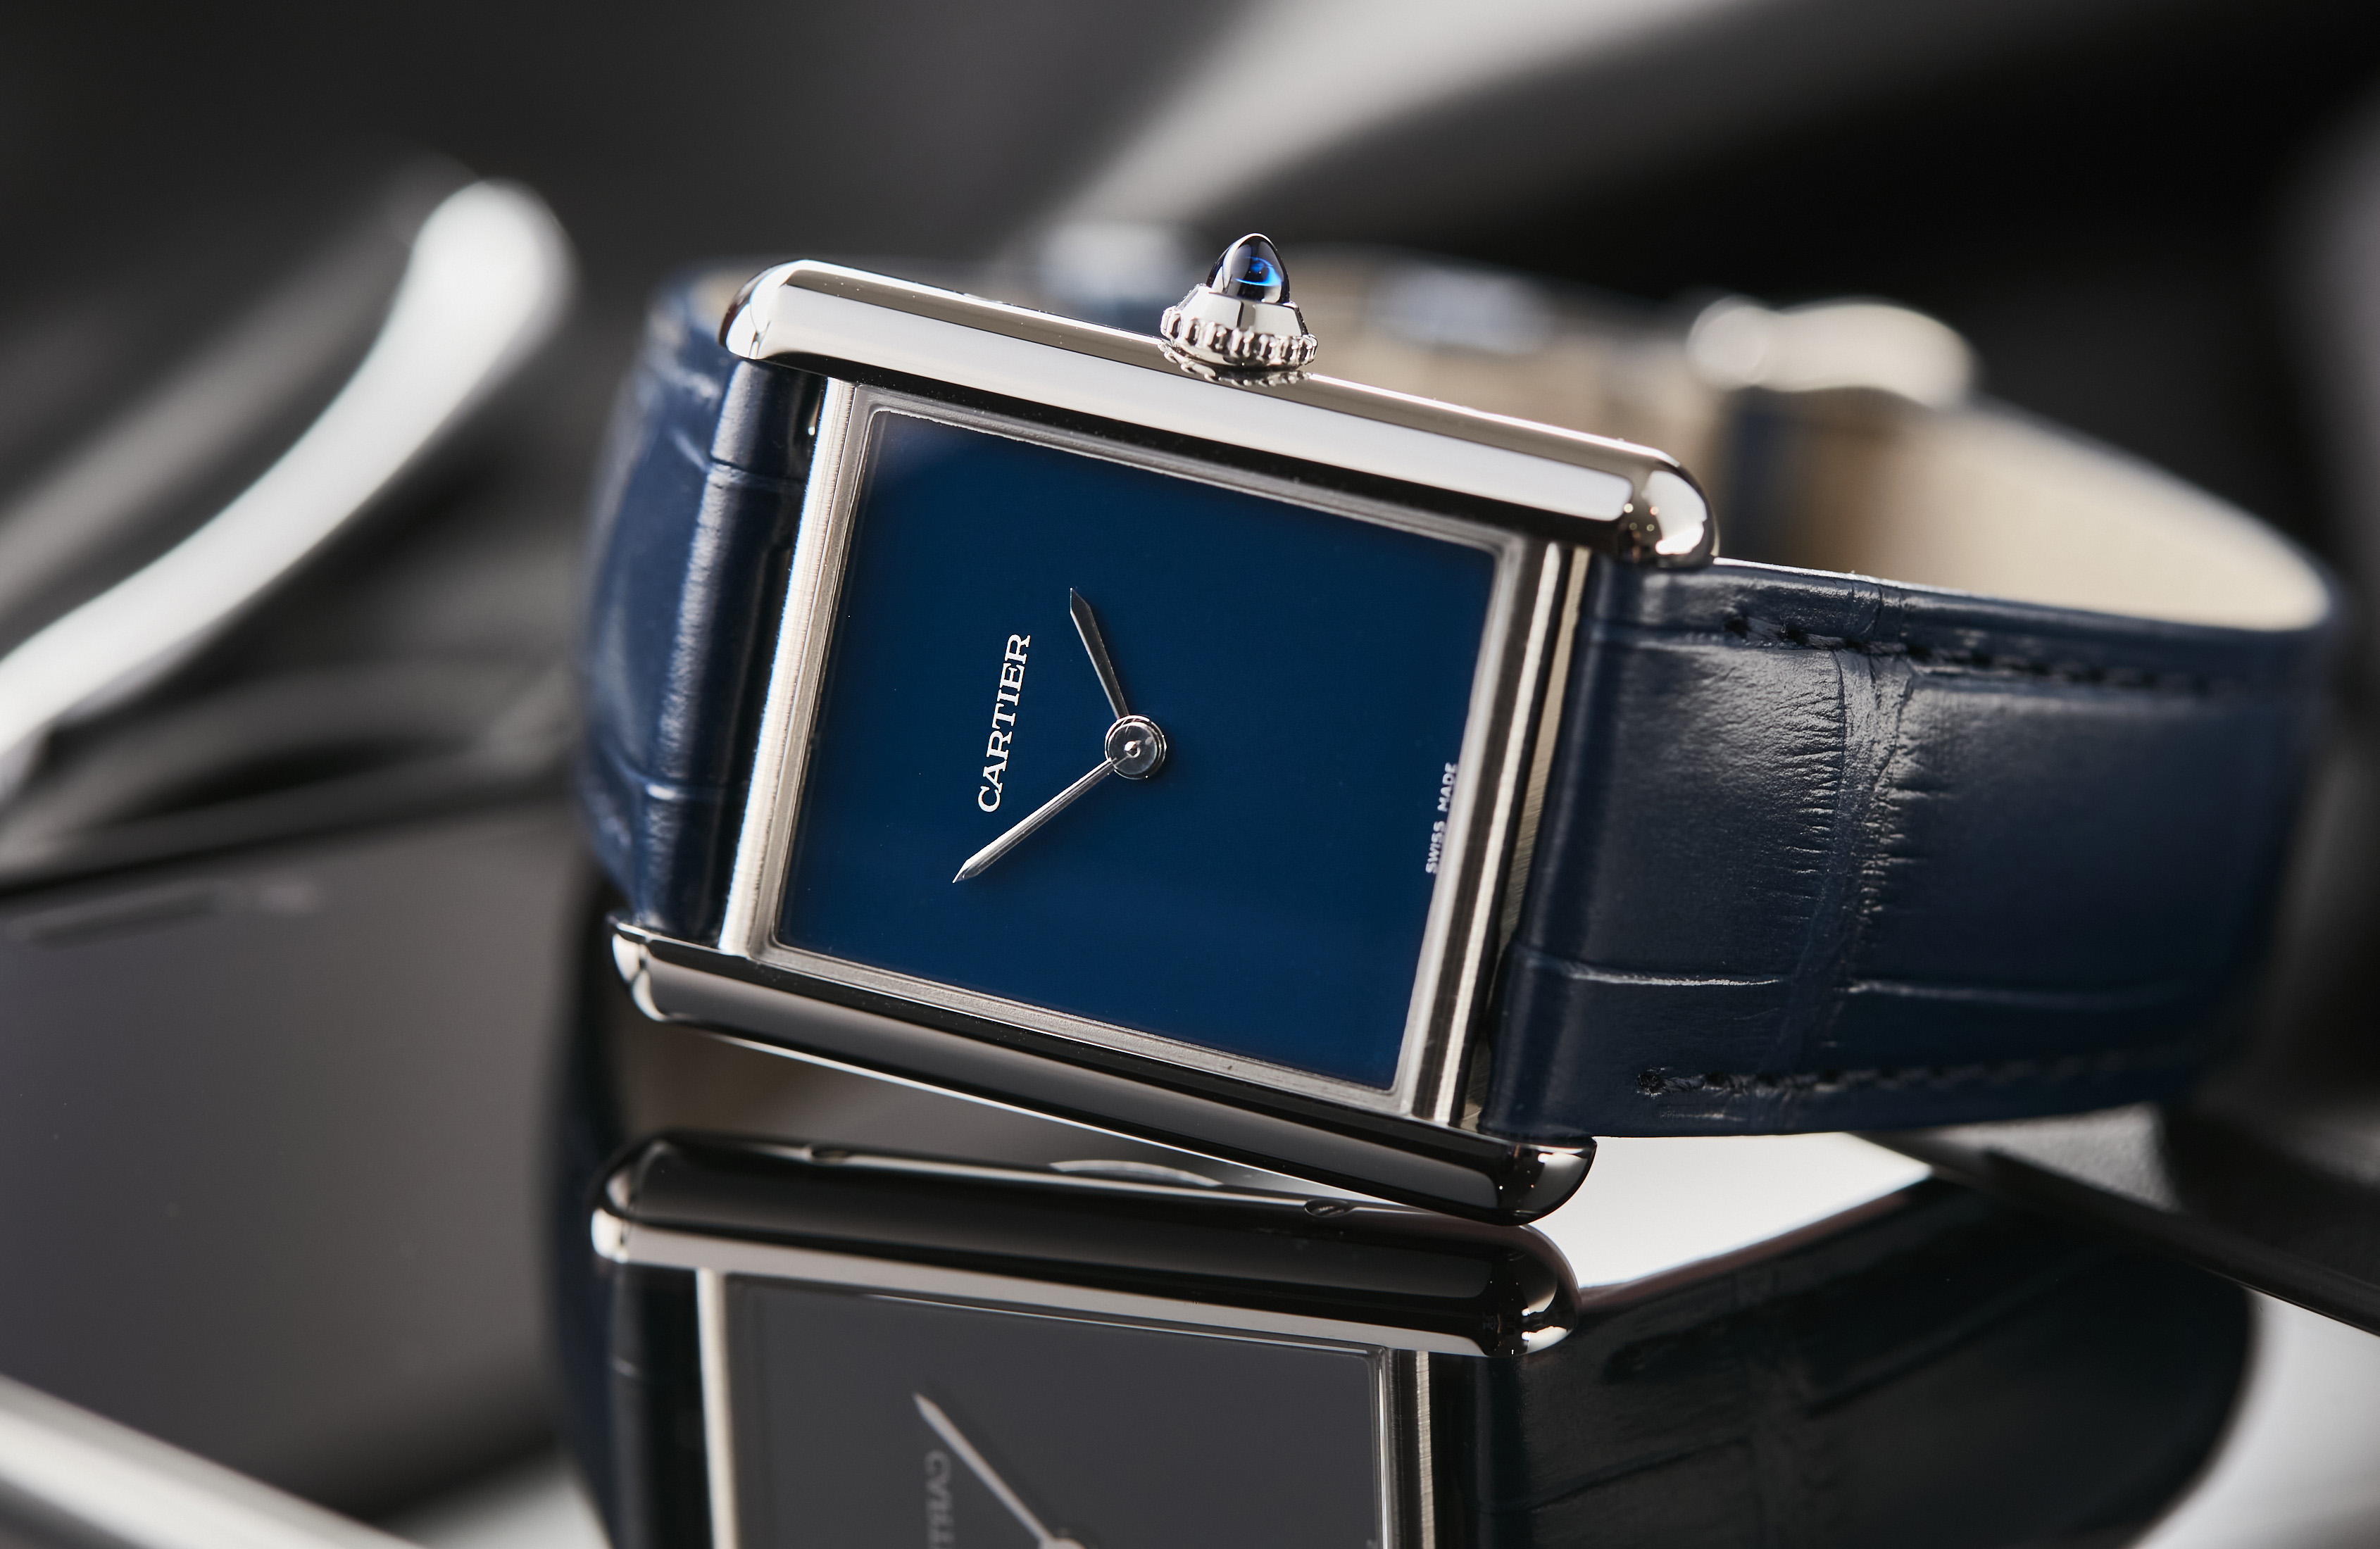 HANDS-ON: The Cartier Tank Must presents a statement piece with a 